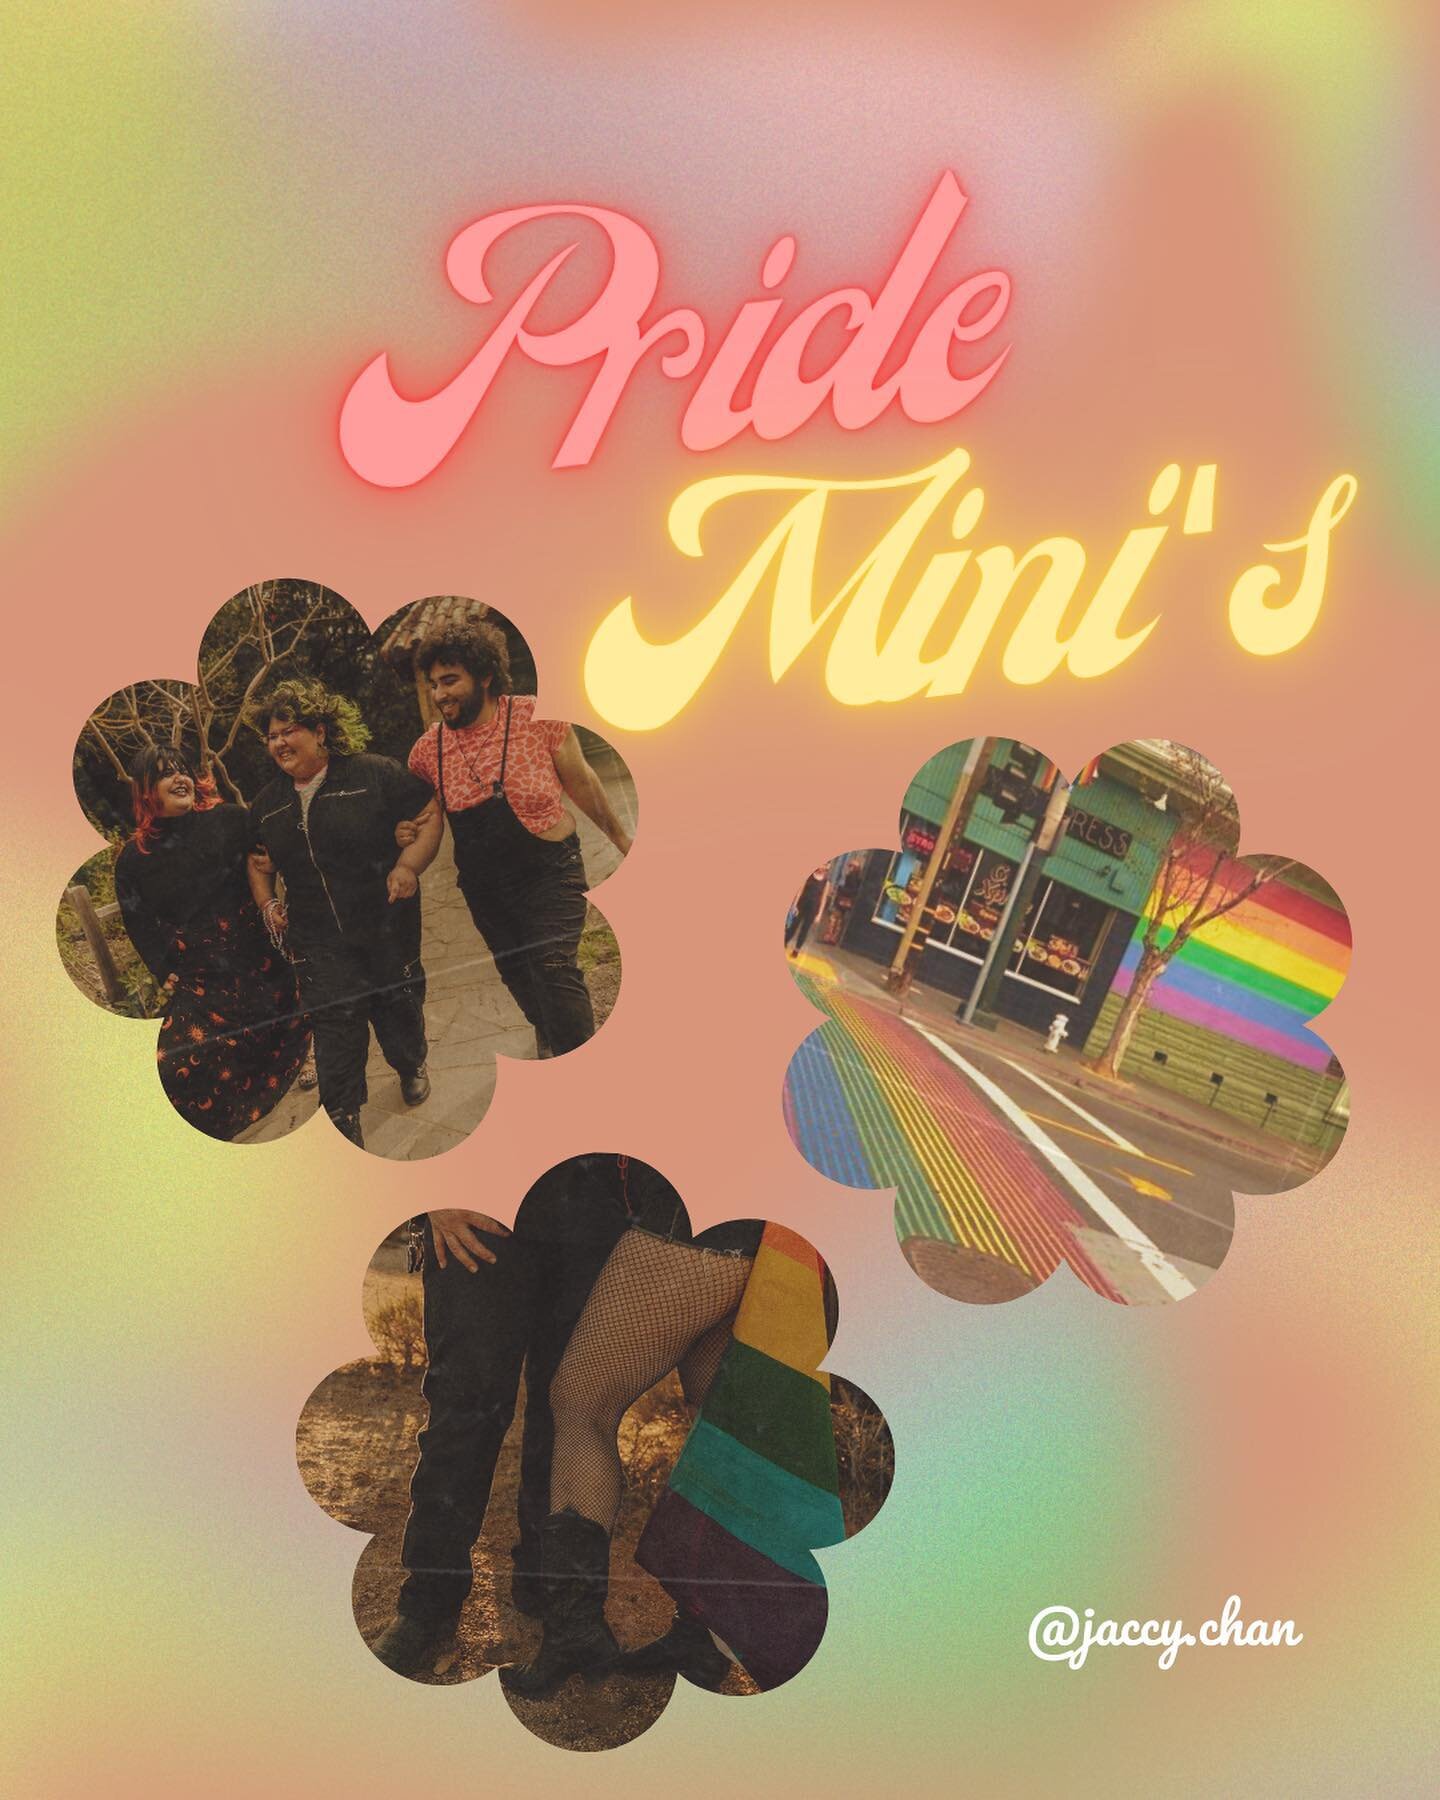 EEKKK did someone say Pride mini sessions?

WHATTT? YES! This is not a drill, run, don't walk to sign up for your spot.

I am hosting rainbow crosswalk mini sessions on June 5th to celebrate all queer love!

- Fresh social media content
- Branding he